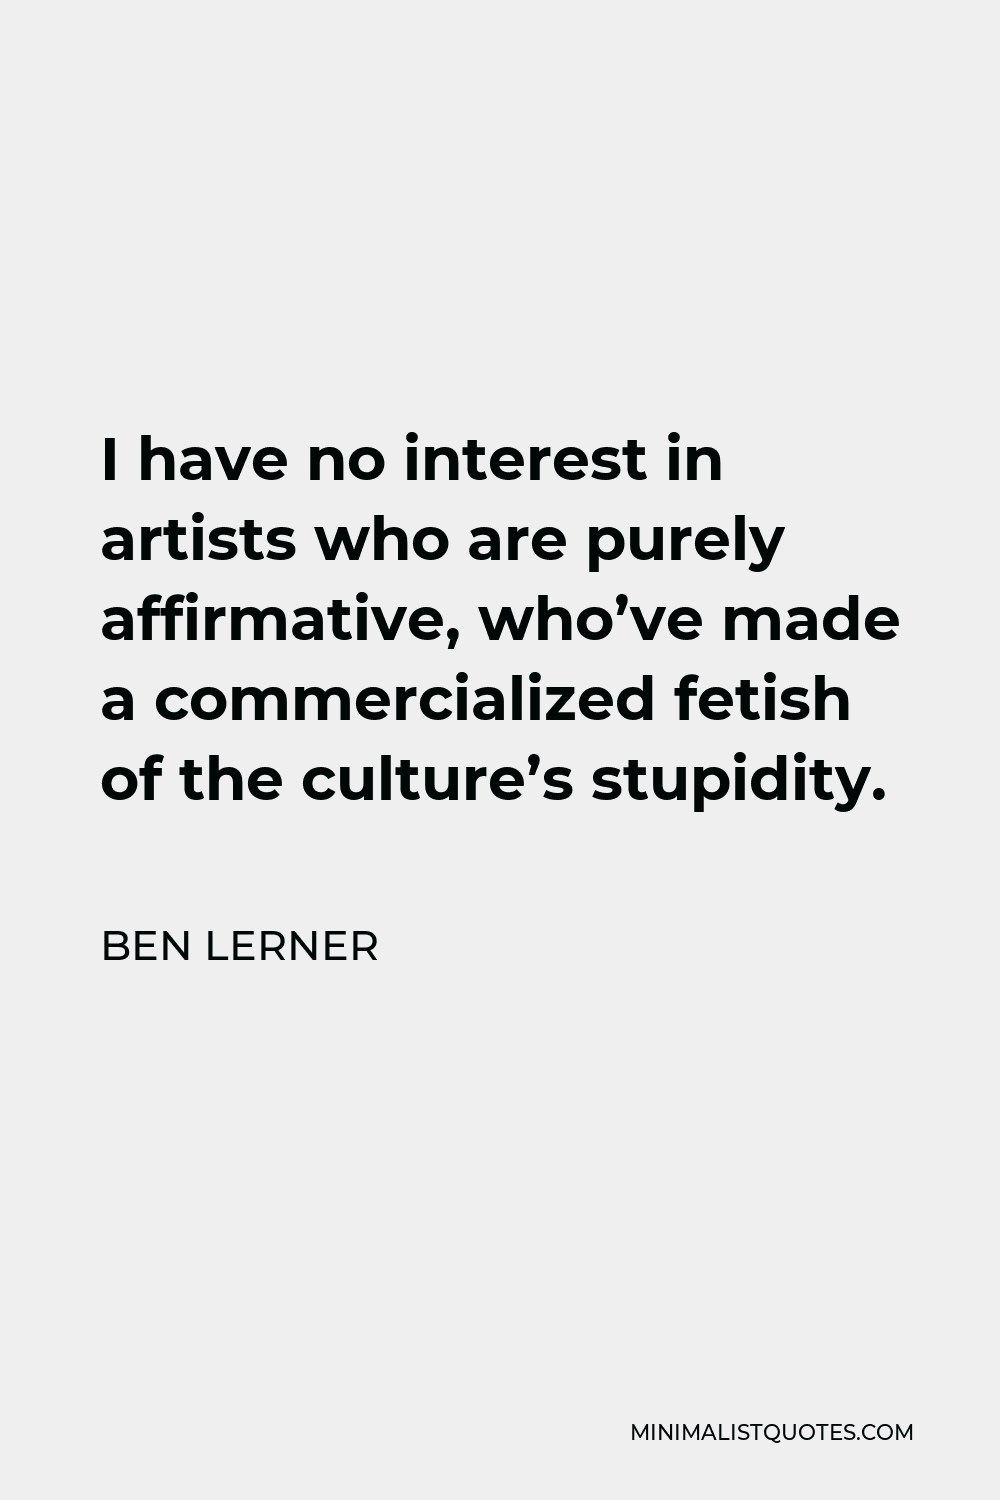 Ben Lerner Quote - I have no interest in artists who are purely affirmative, who’ve made a commercialized fetish of the culture’s stupidity.